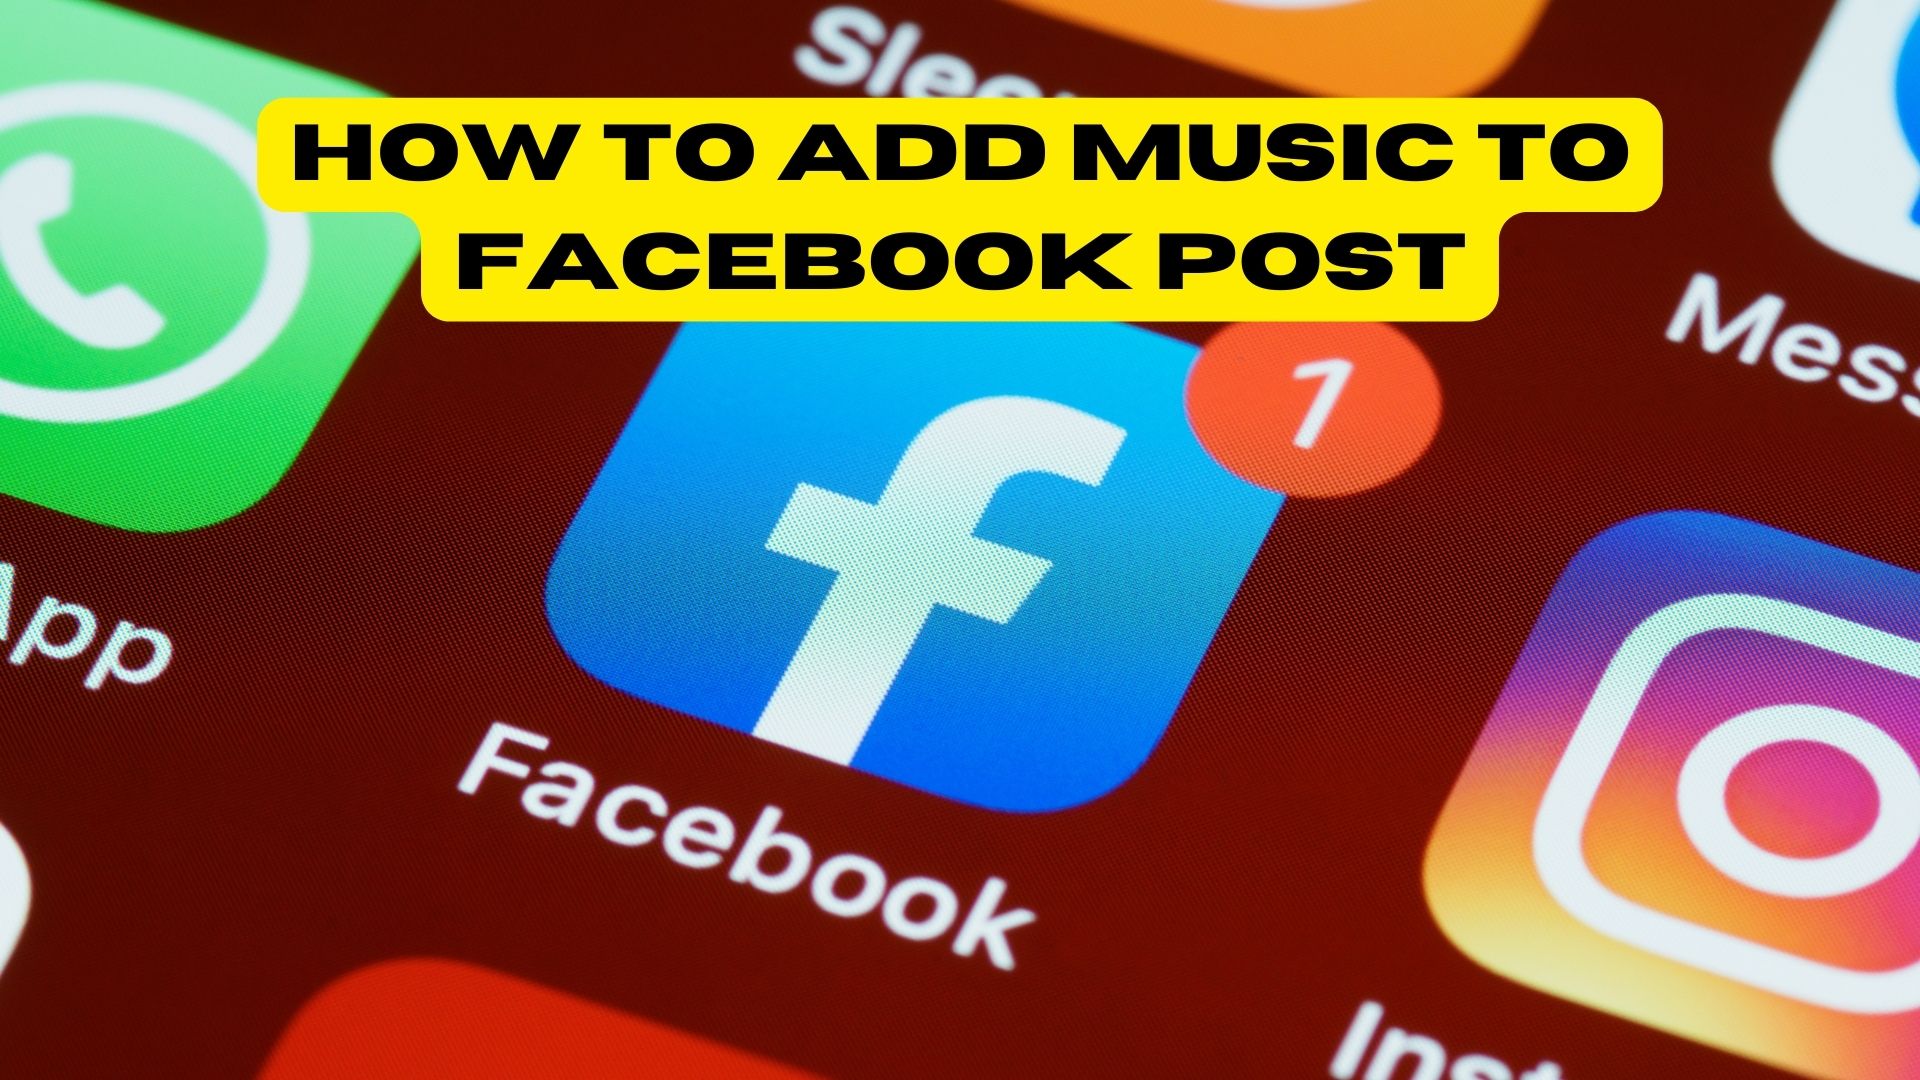 How to Add Music to Facebook Post